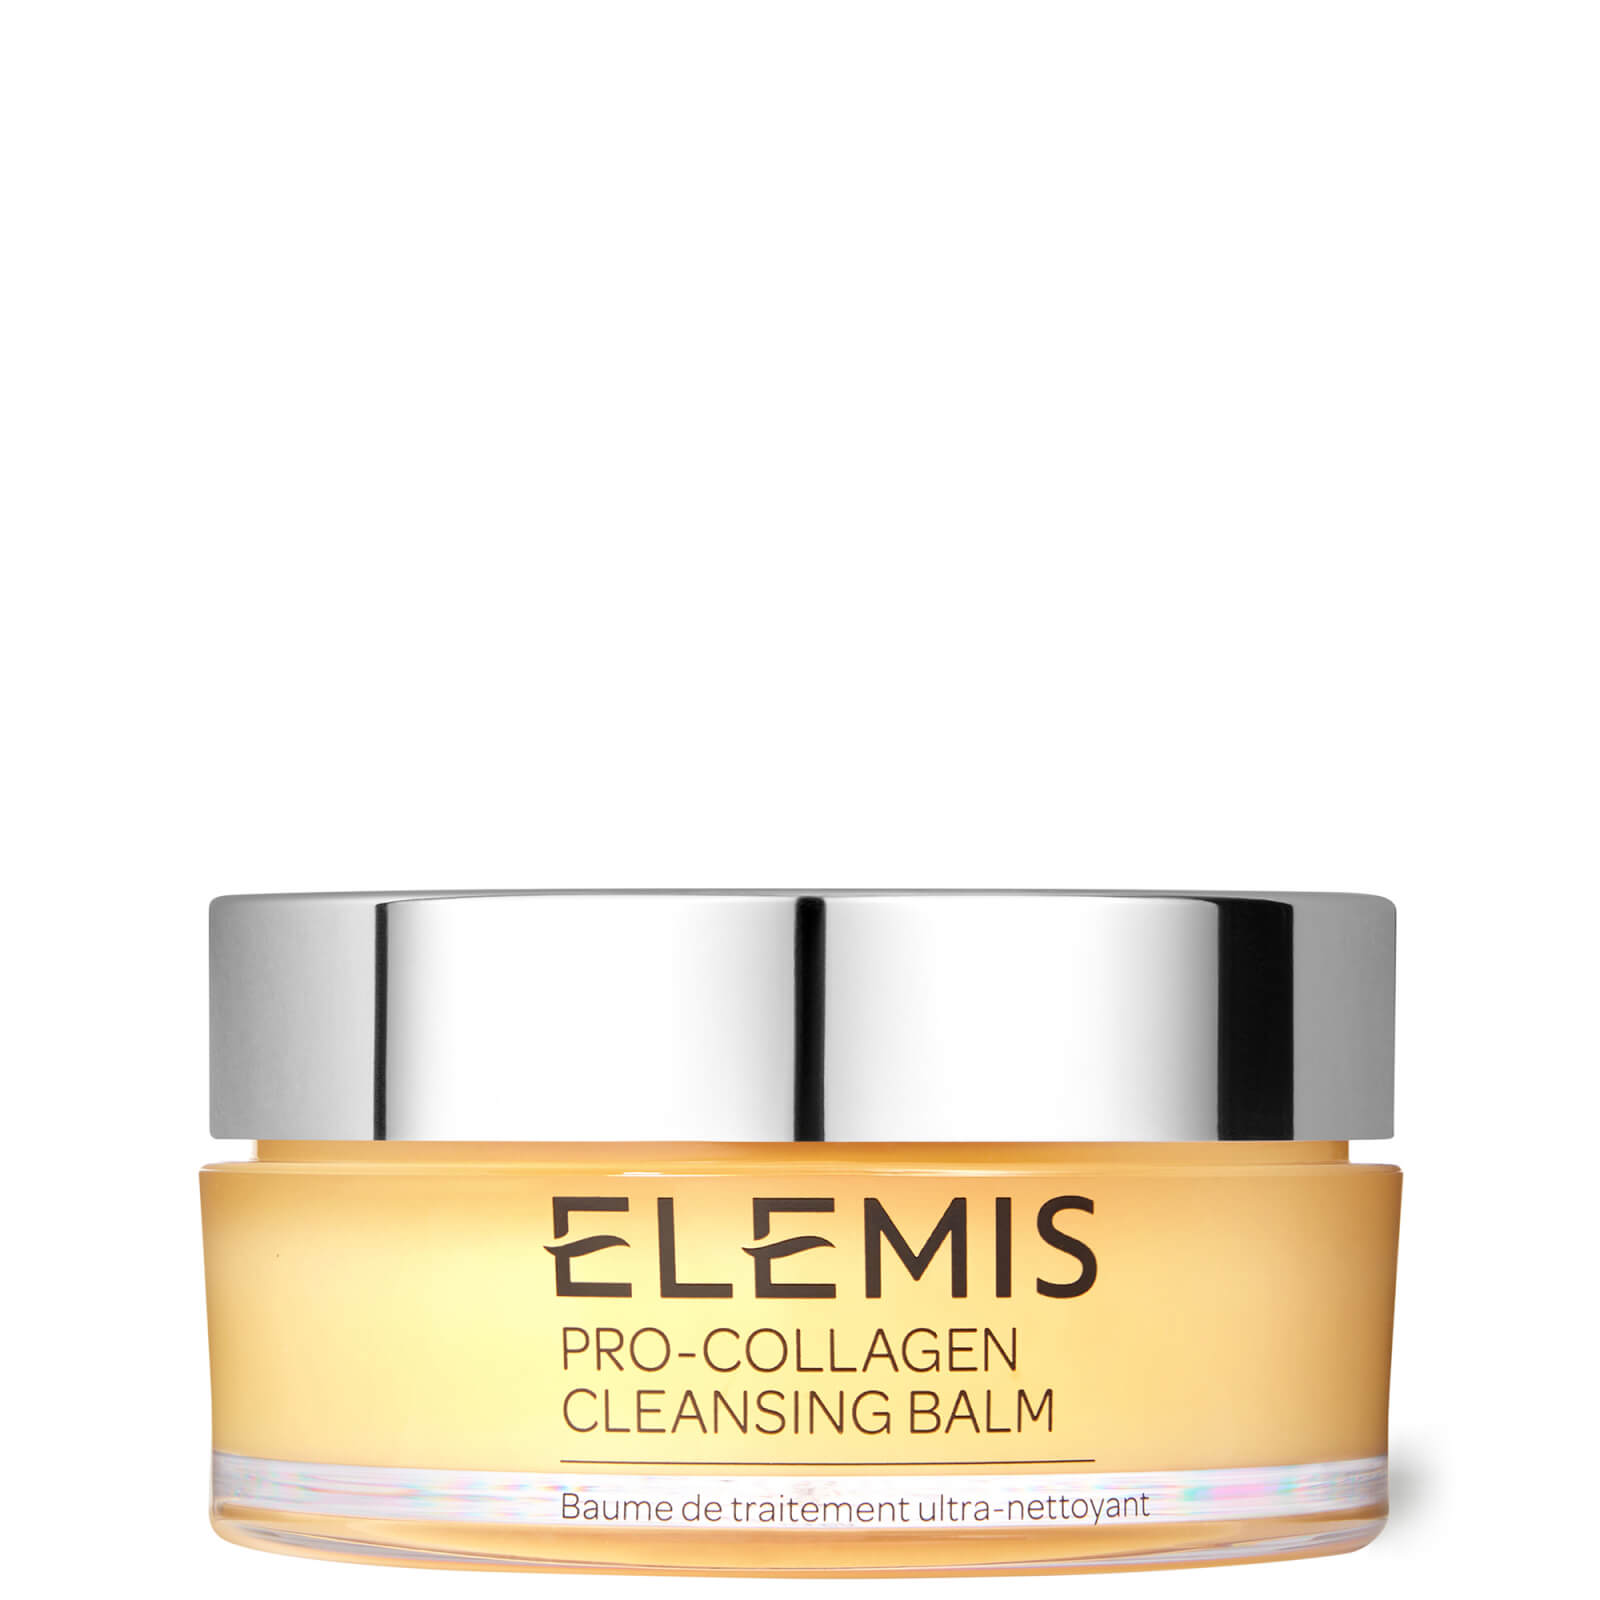 Photos - Facial / Body Cleansing Product ELEMIS Pro-Collagen Cleansing Balm 100g 